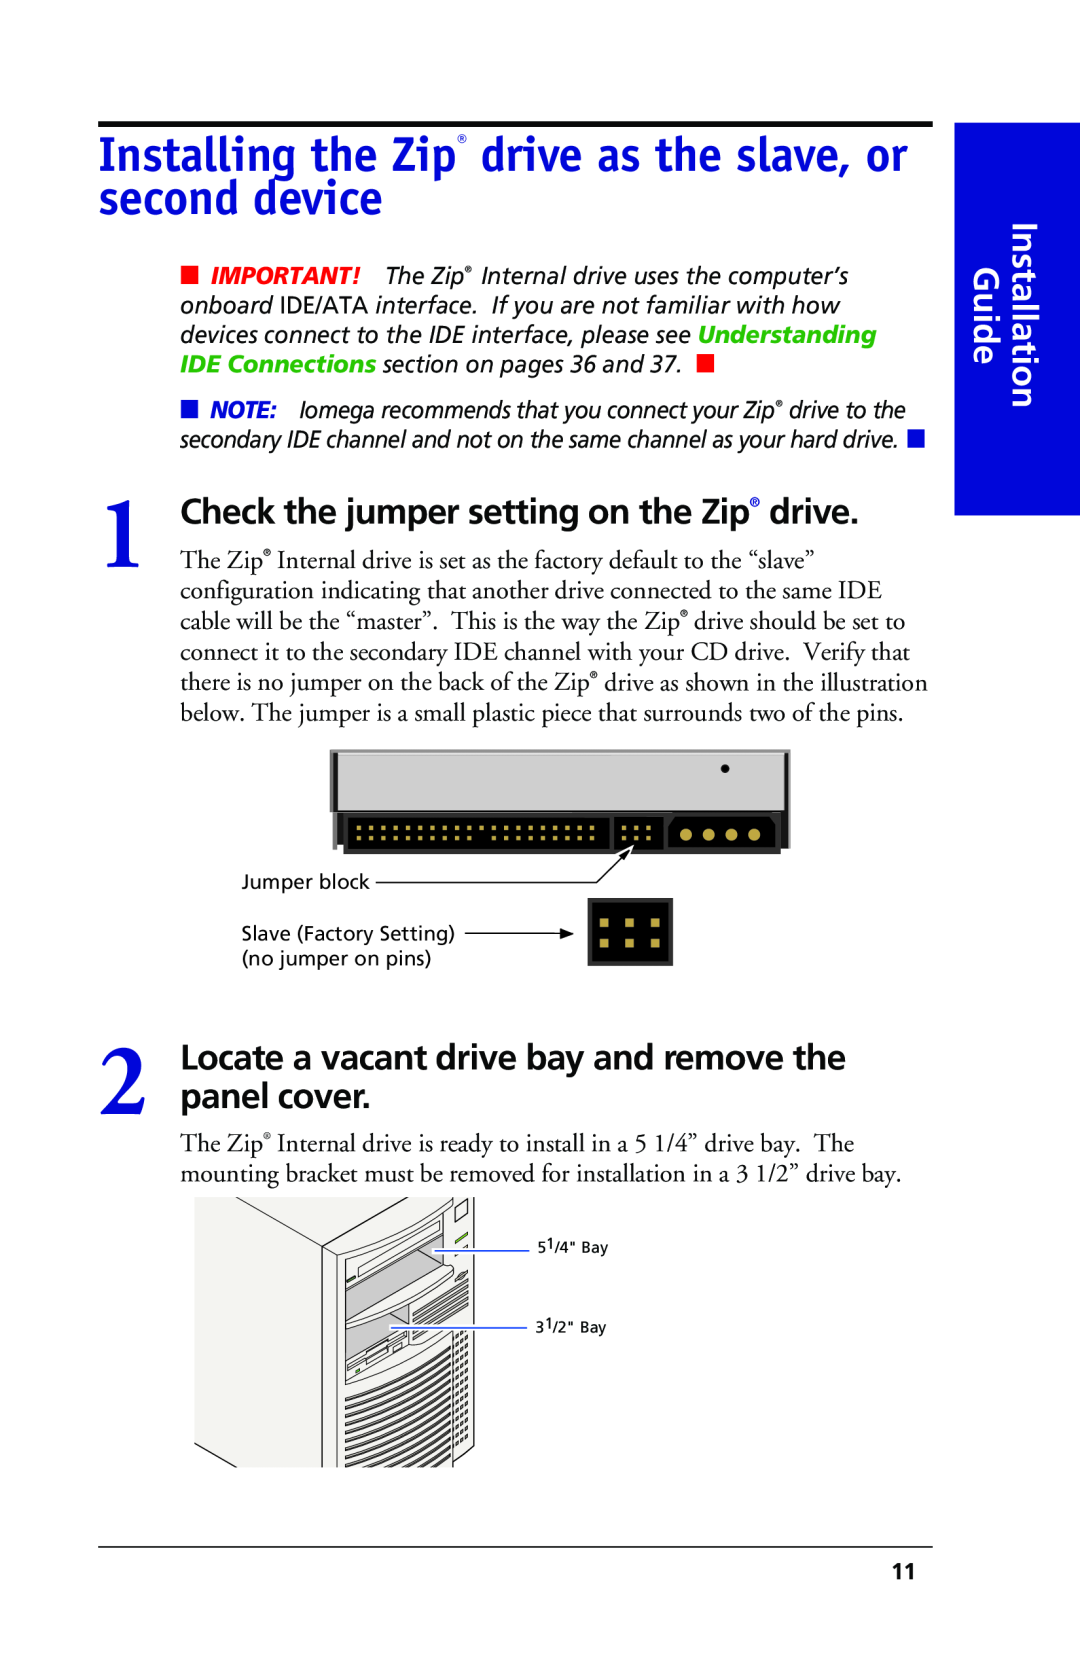 Iomega 03798300 Installing the Zip drive as the slave, or second device, Check the jumper setting on the Zip drive 